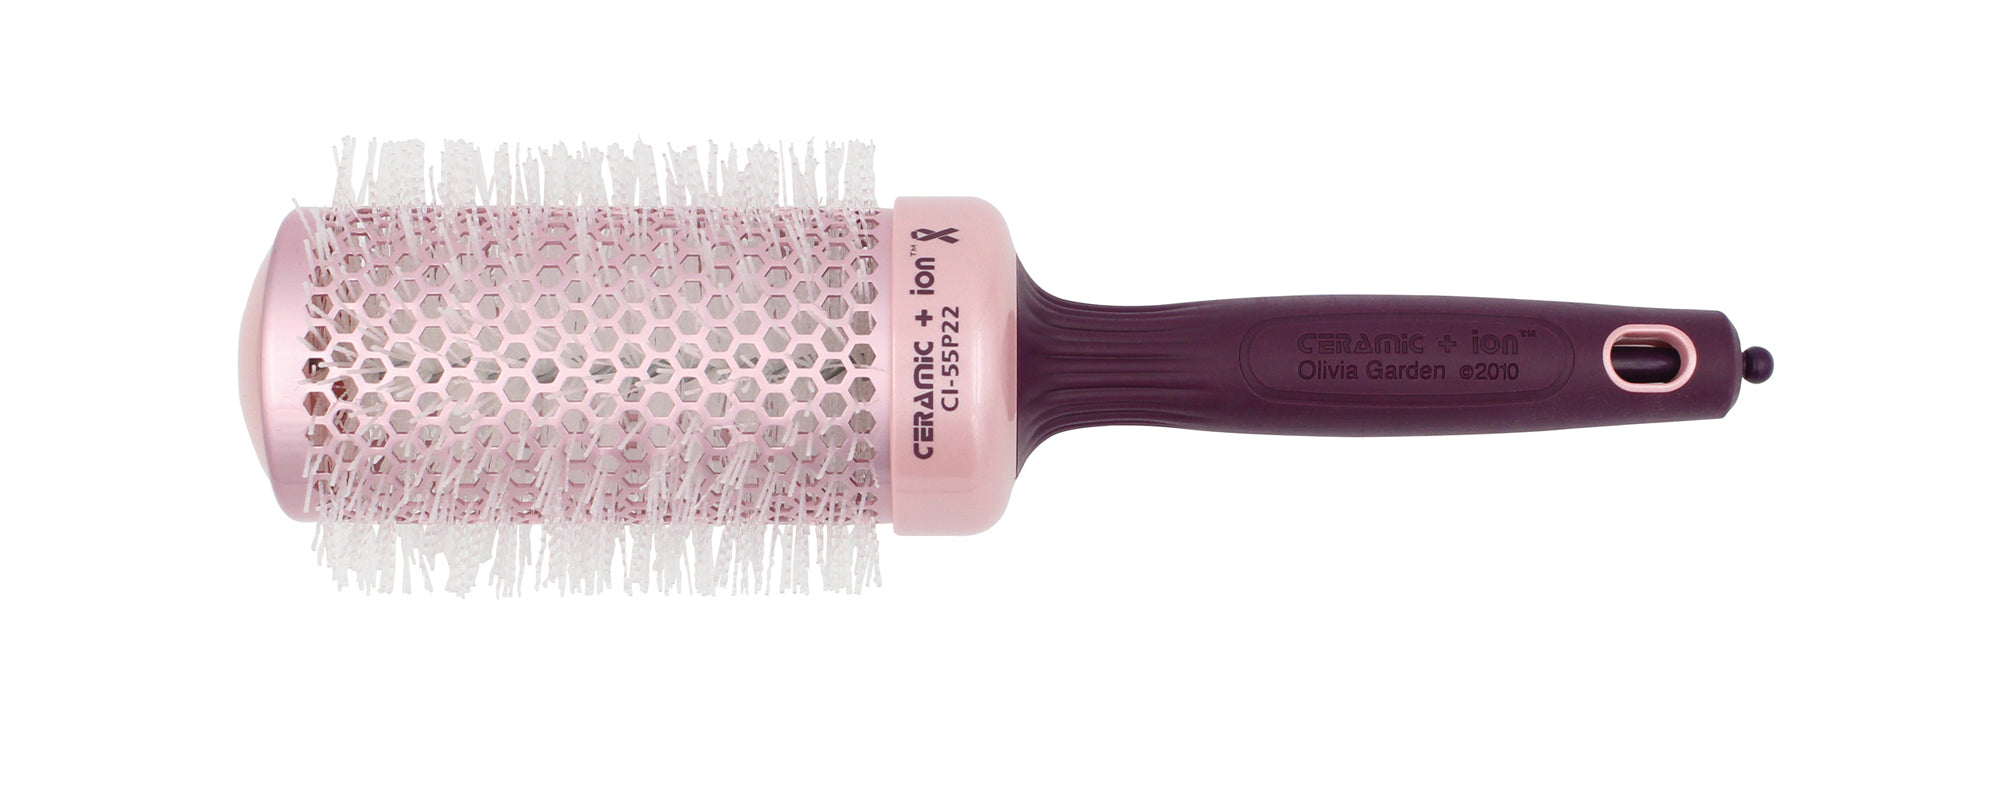 Hair brushes: Ceramic + ion BCA 2022 Limited Edition | Olivia Garden